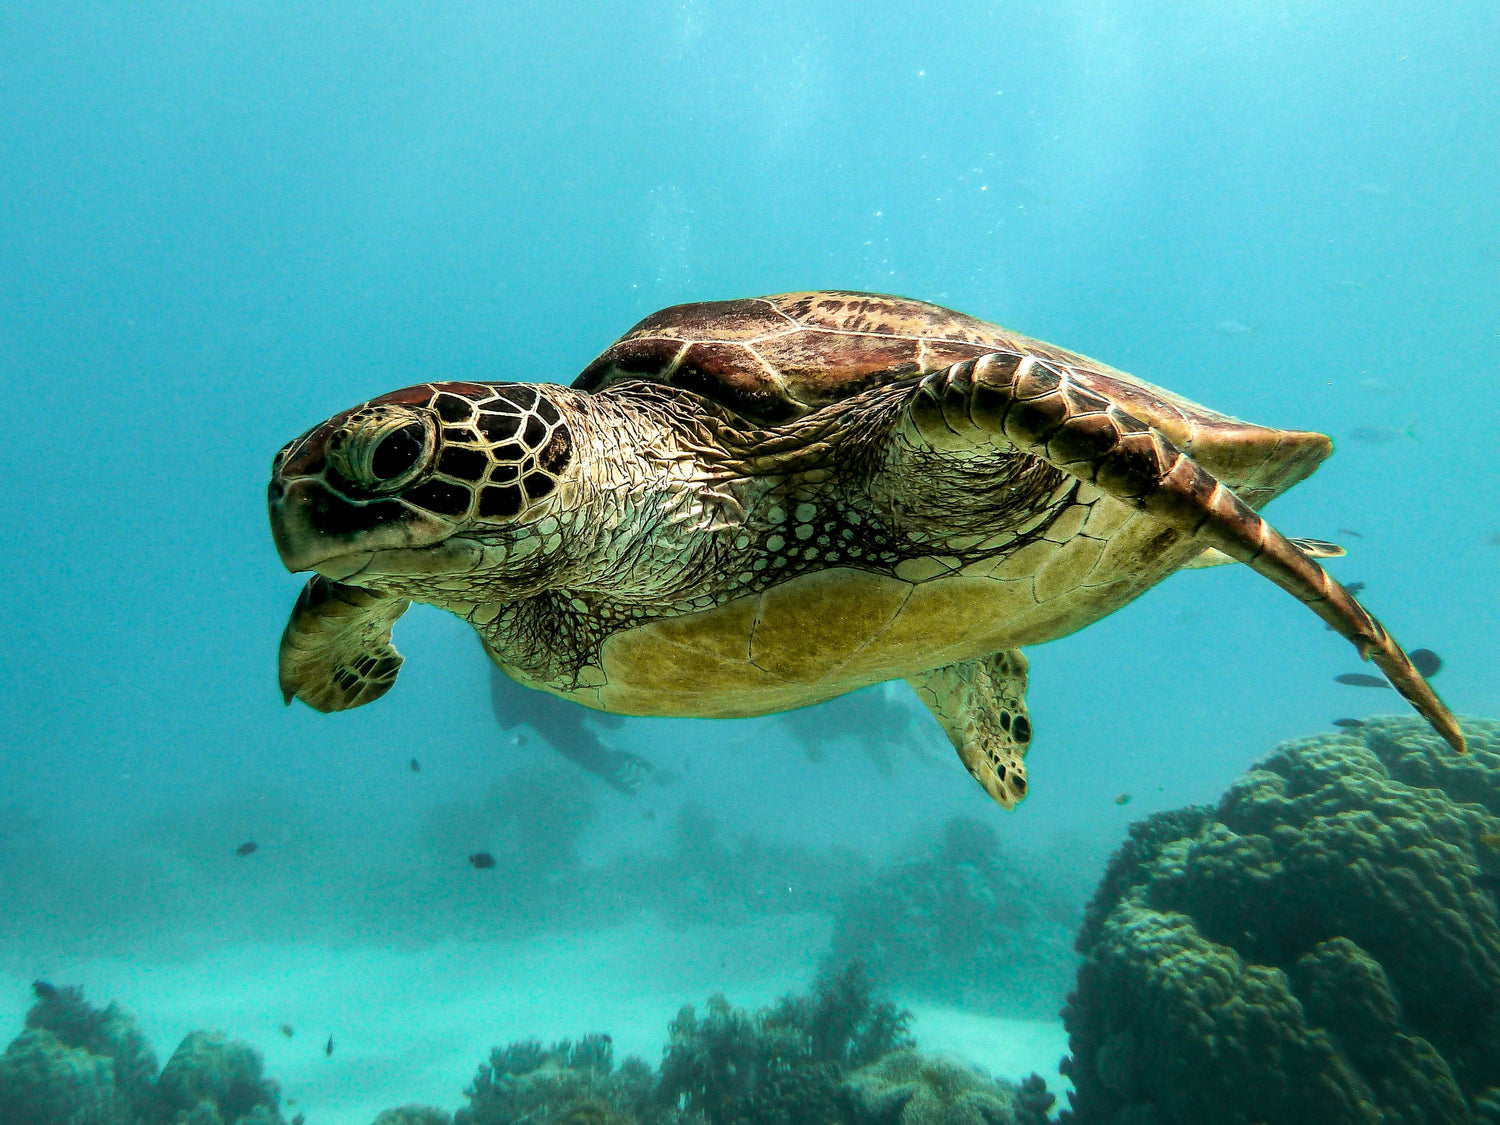 Why are sea turtles endangered? And how you can save sea turtles by buying lip balm